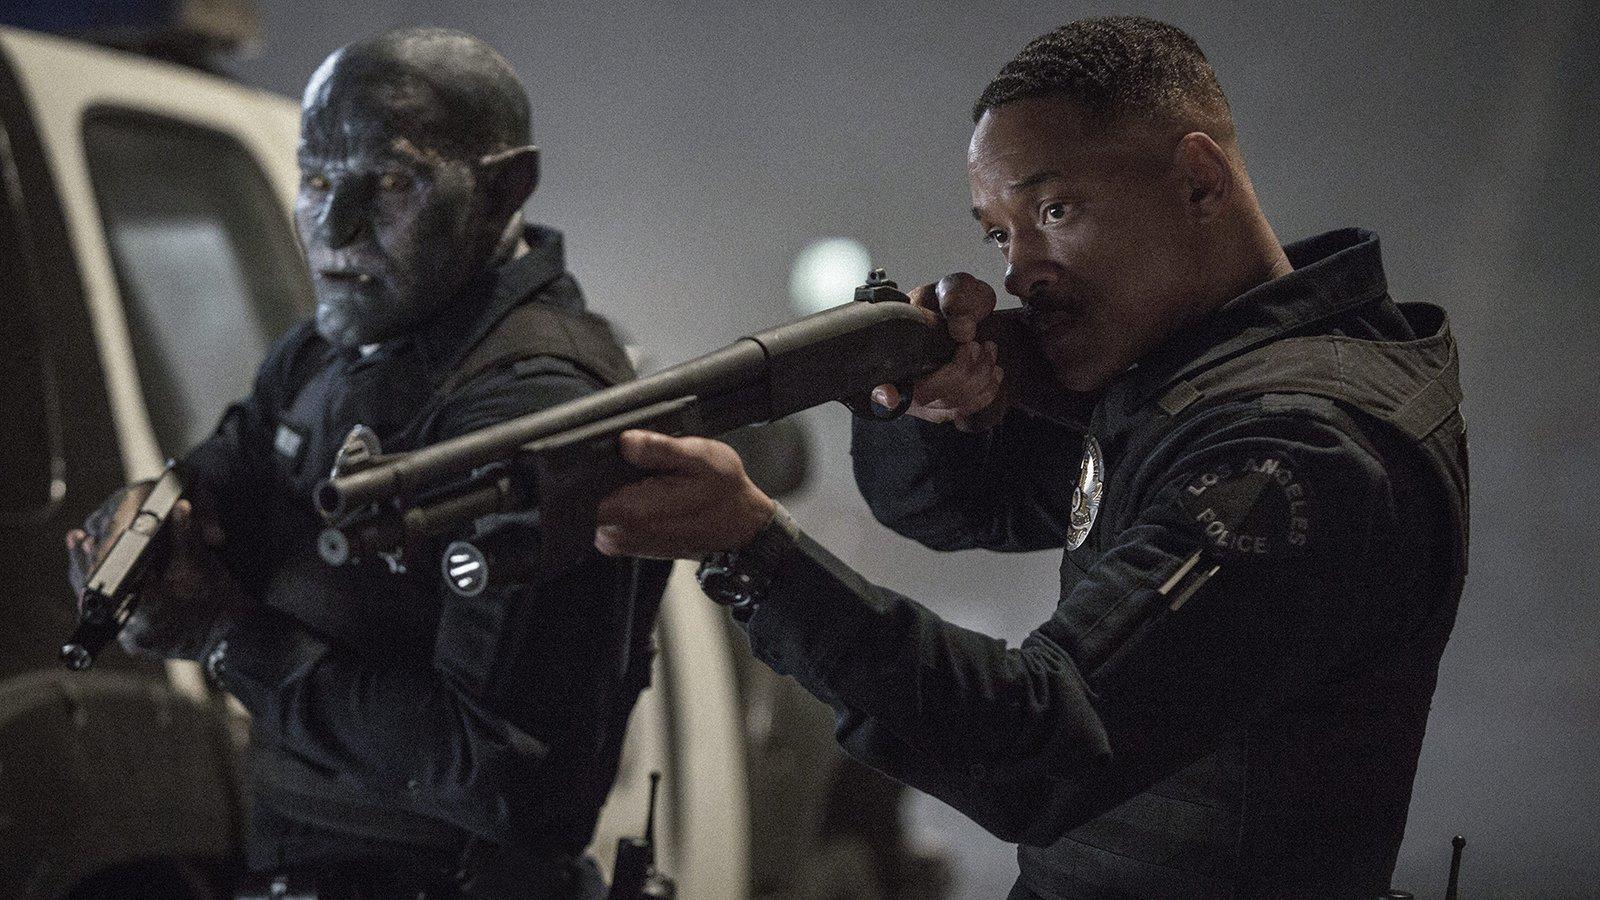 Joel Edgerton and Will Smith in 'Bright'